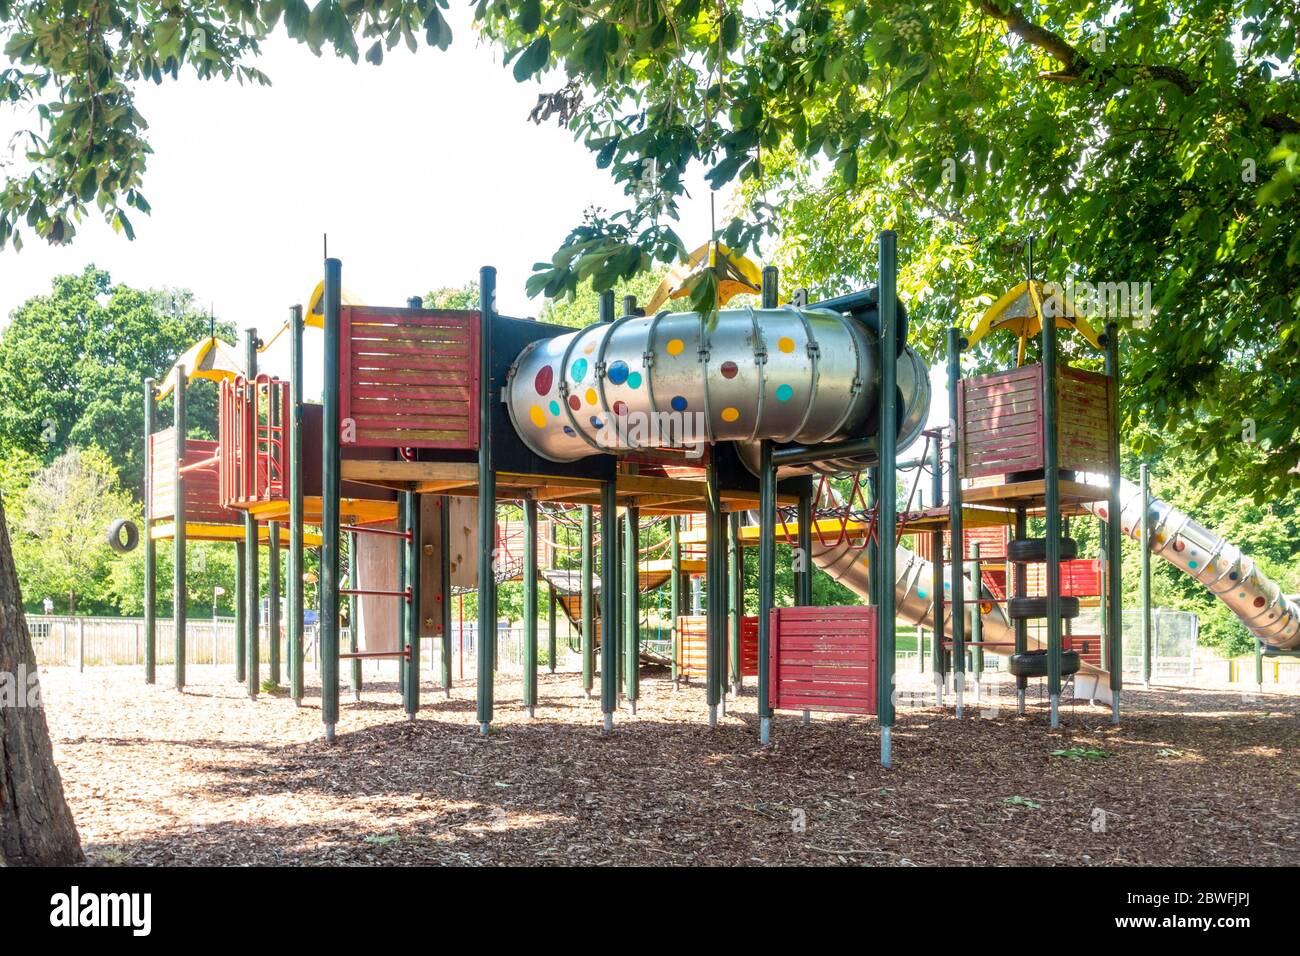 The Children's playground in Prospect Park, Reading is quiet and empty as it is closed due to the Coronavirus pandemic. Stock Photo